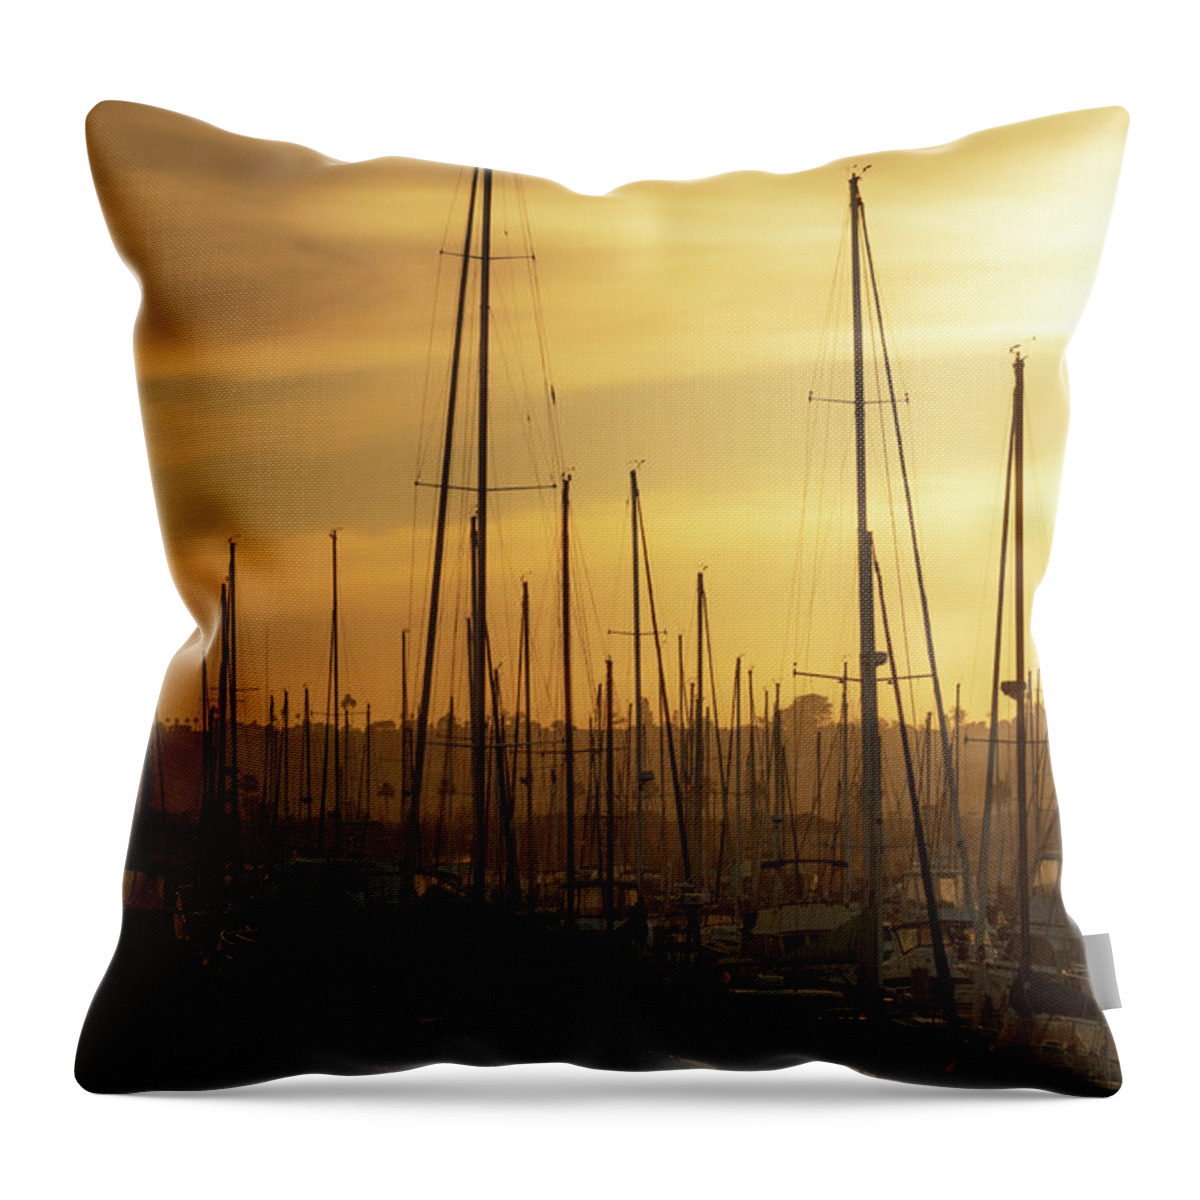 Boat Throw Pillow featuring the photograph Golden Harbor 3 by Ryan Weddle